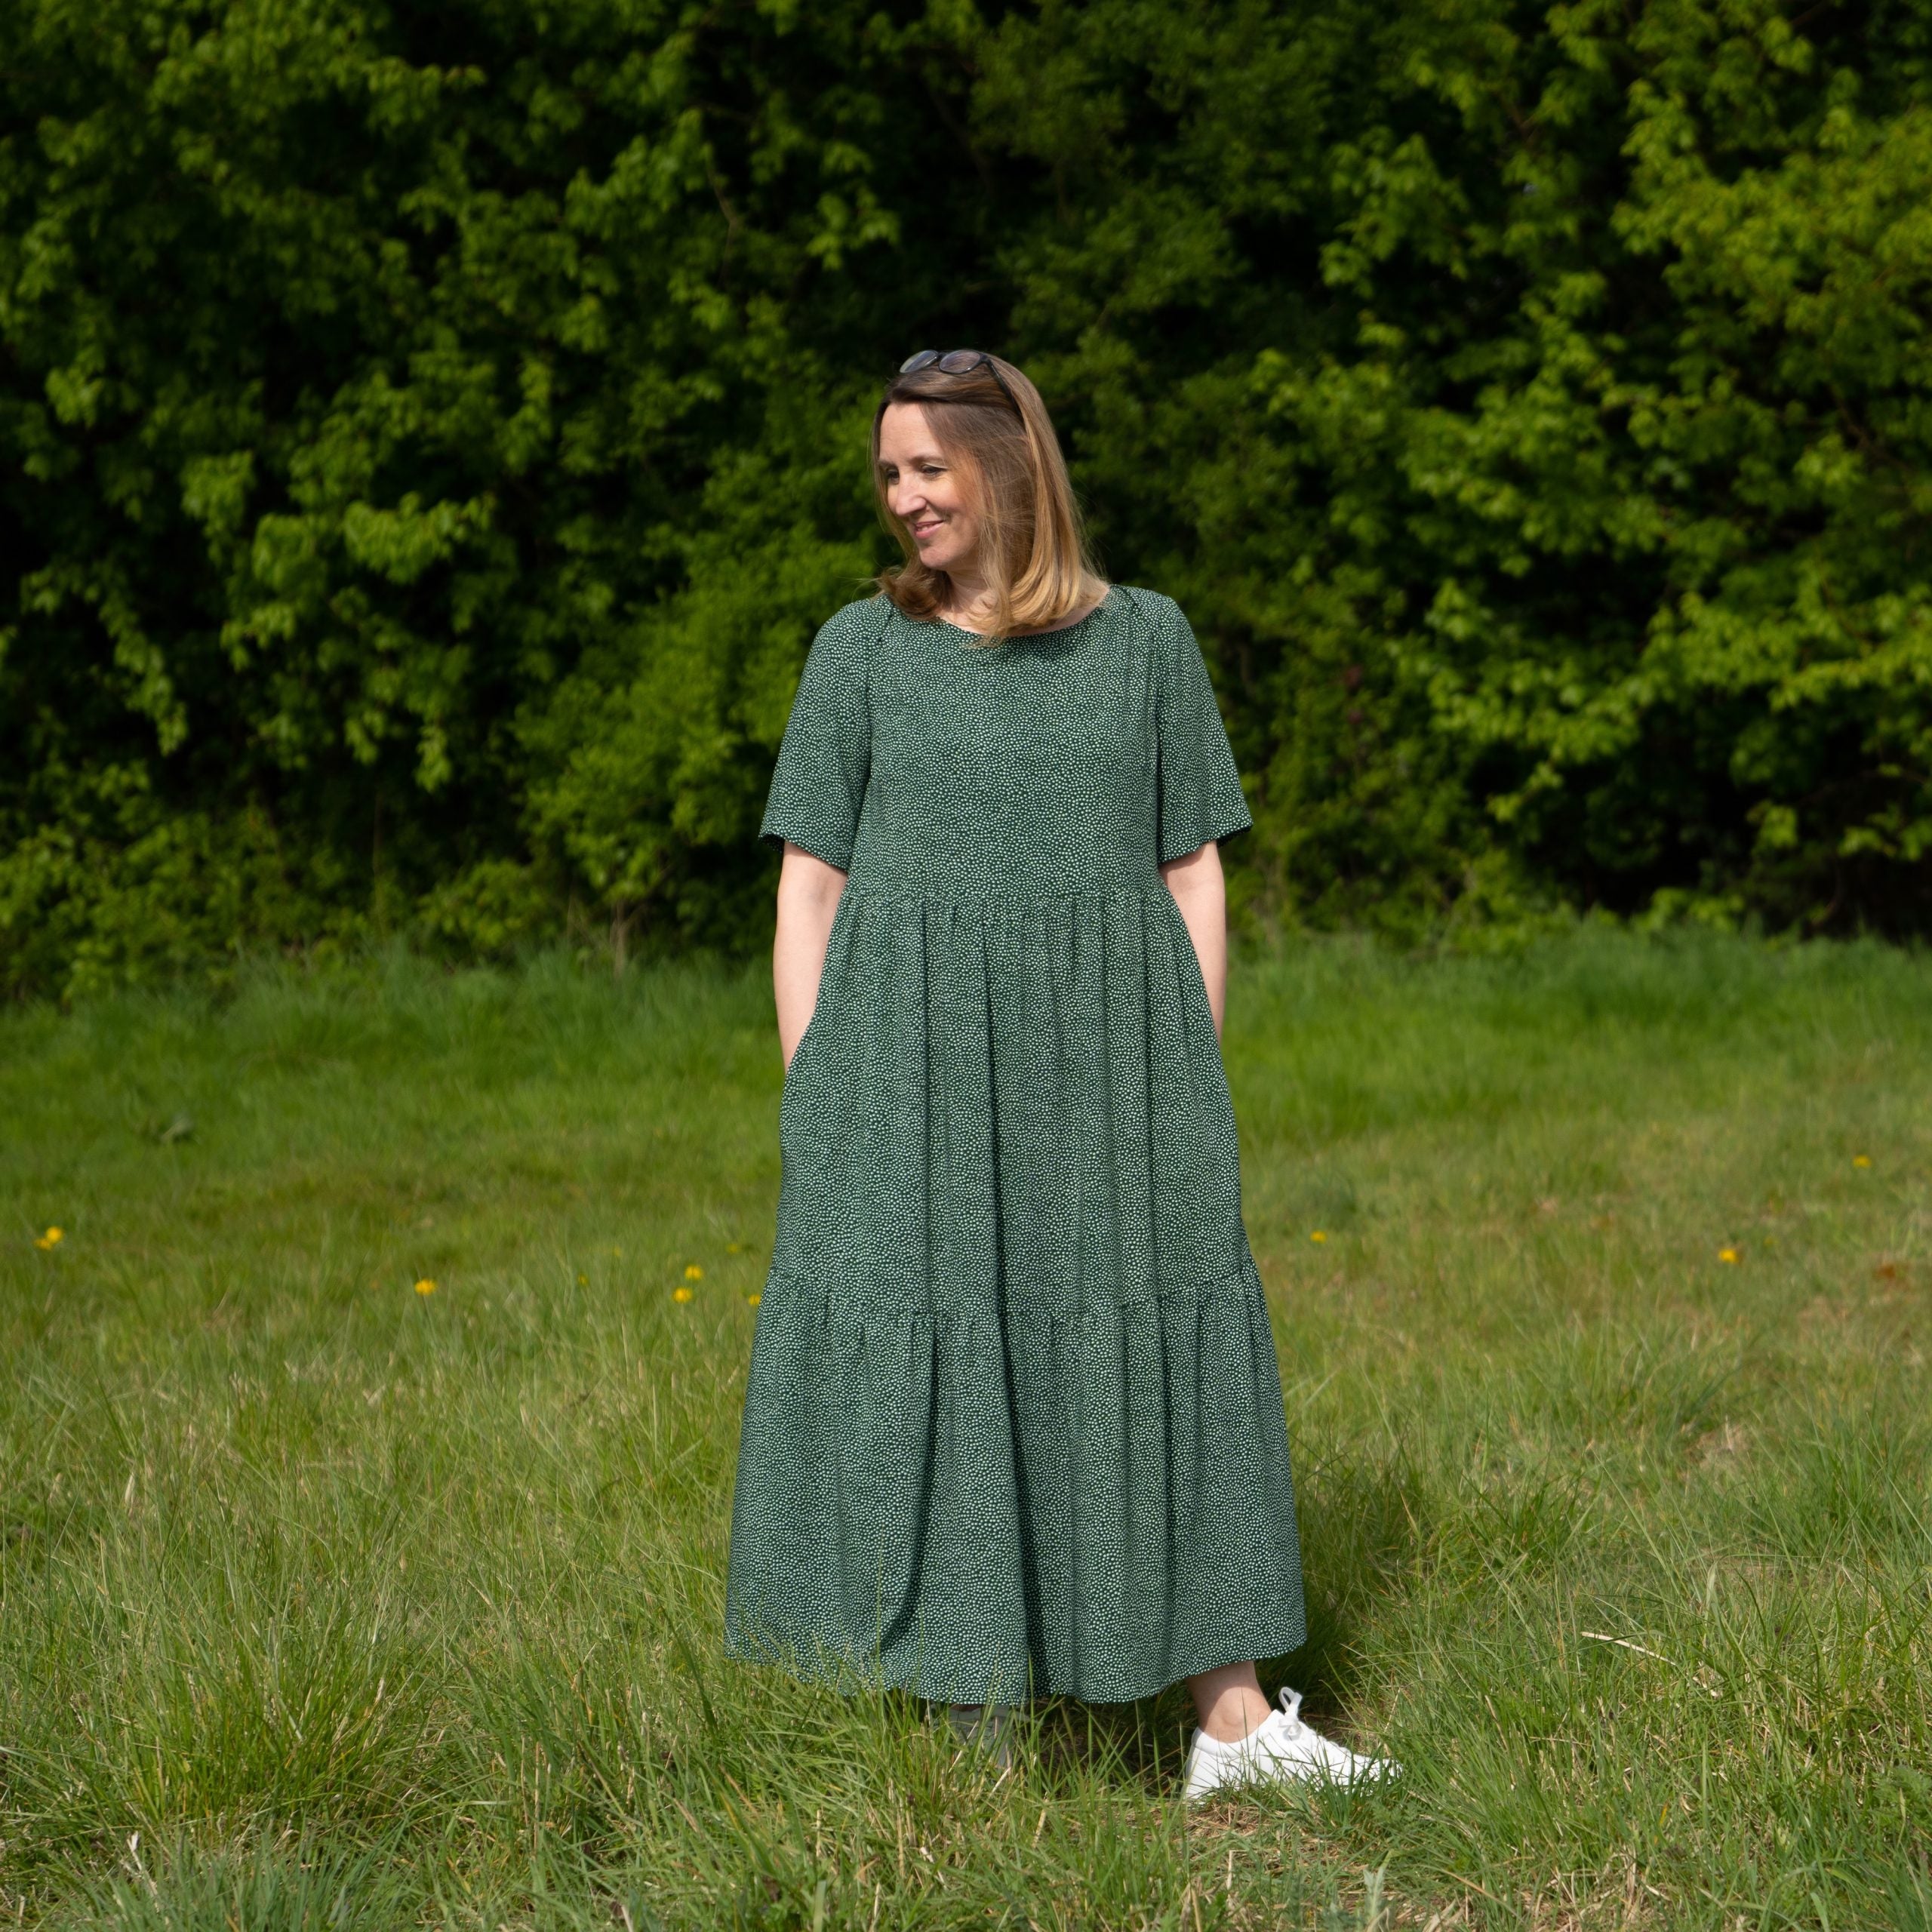 Woman wearing the Angelica Dress sewing pattern from Sew Me Something on The Fold Line. A dress pattern made in linen, viscose rayon, double gauze, cotton lawn, or broderie anglaise fabrics, featuring an ankle length, elbow length sleeves, gathered shirt 